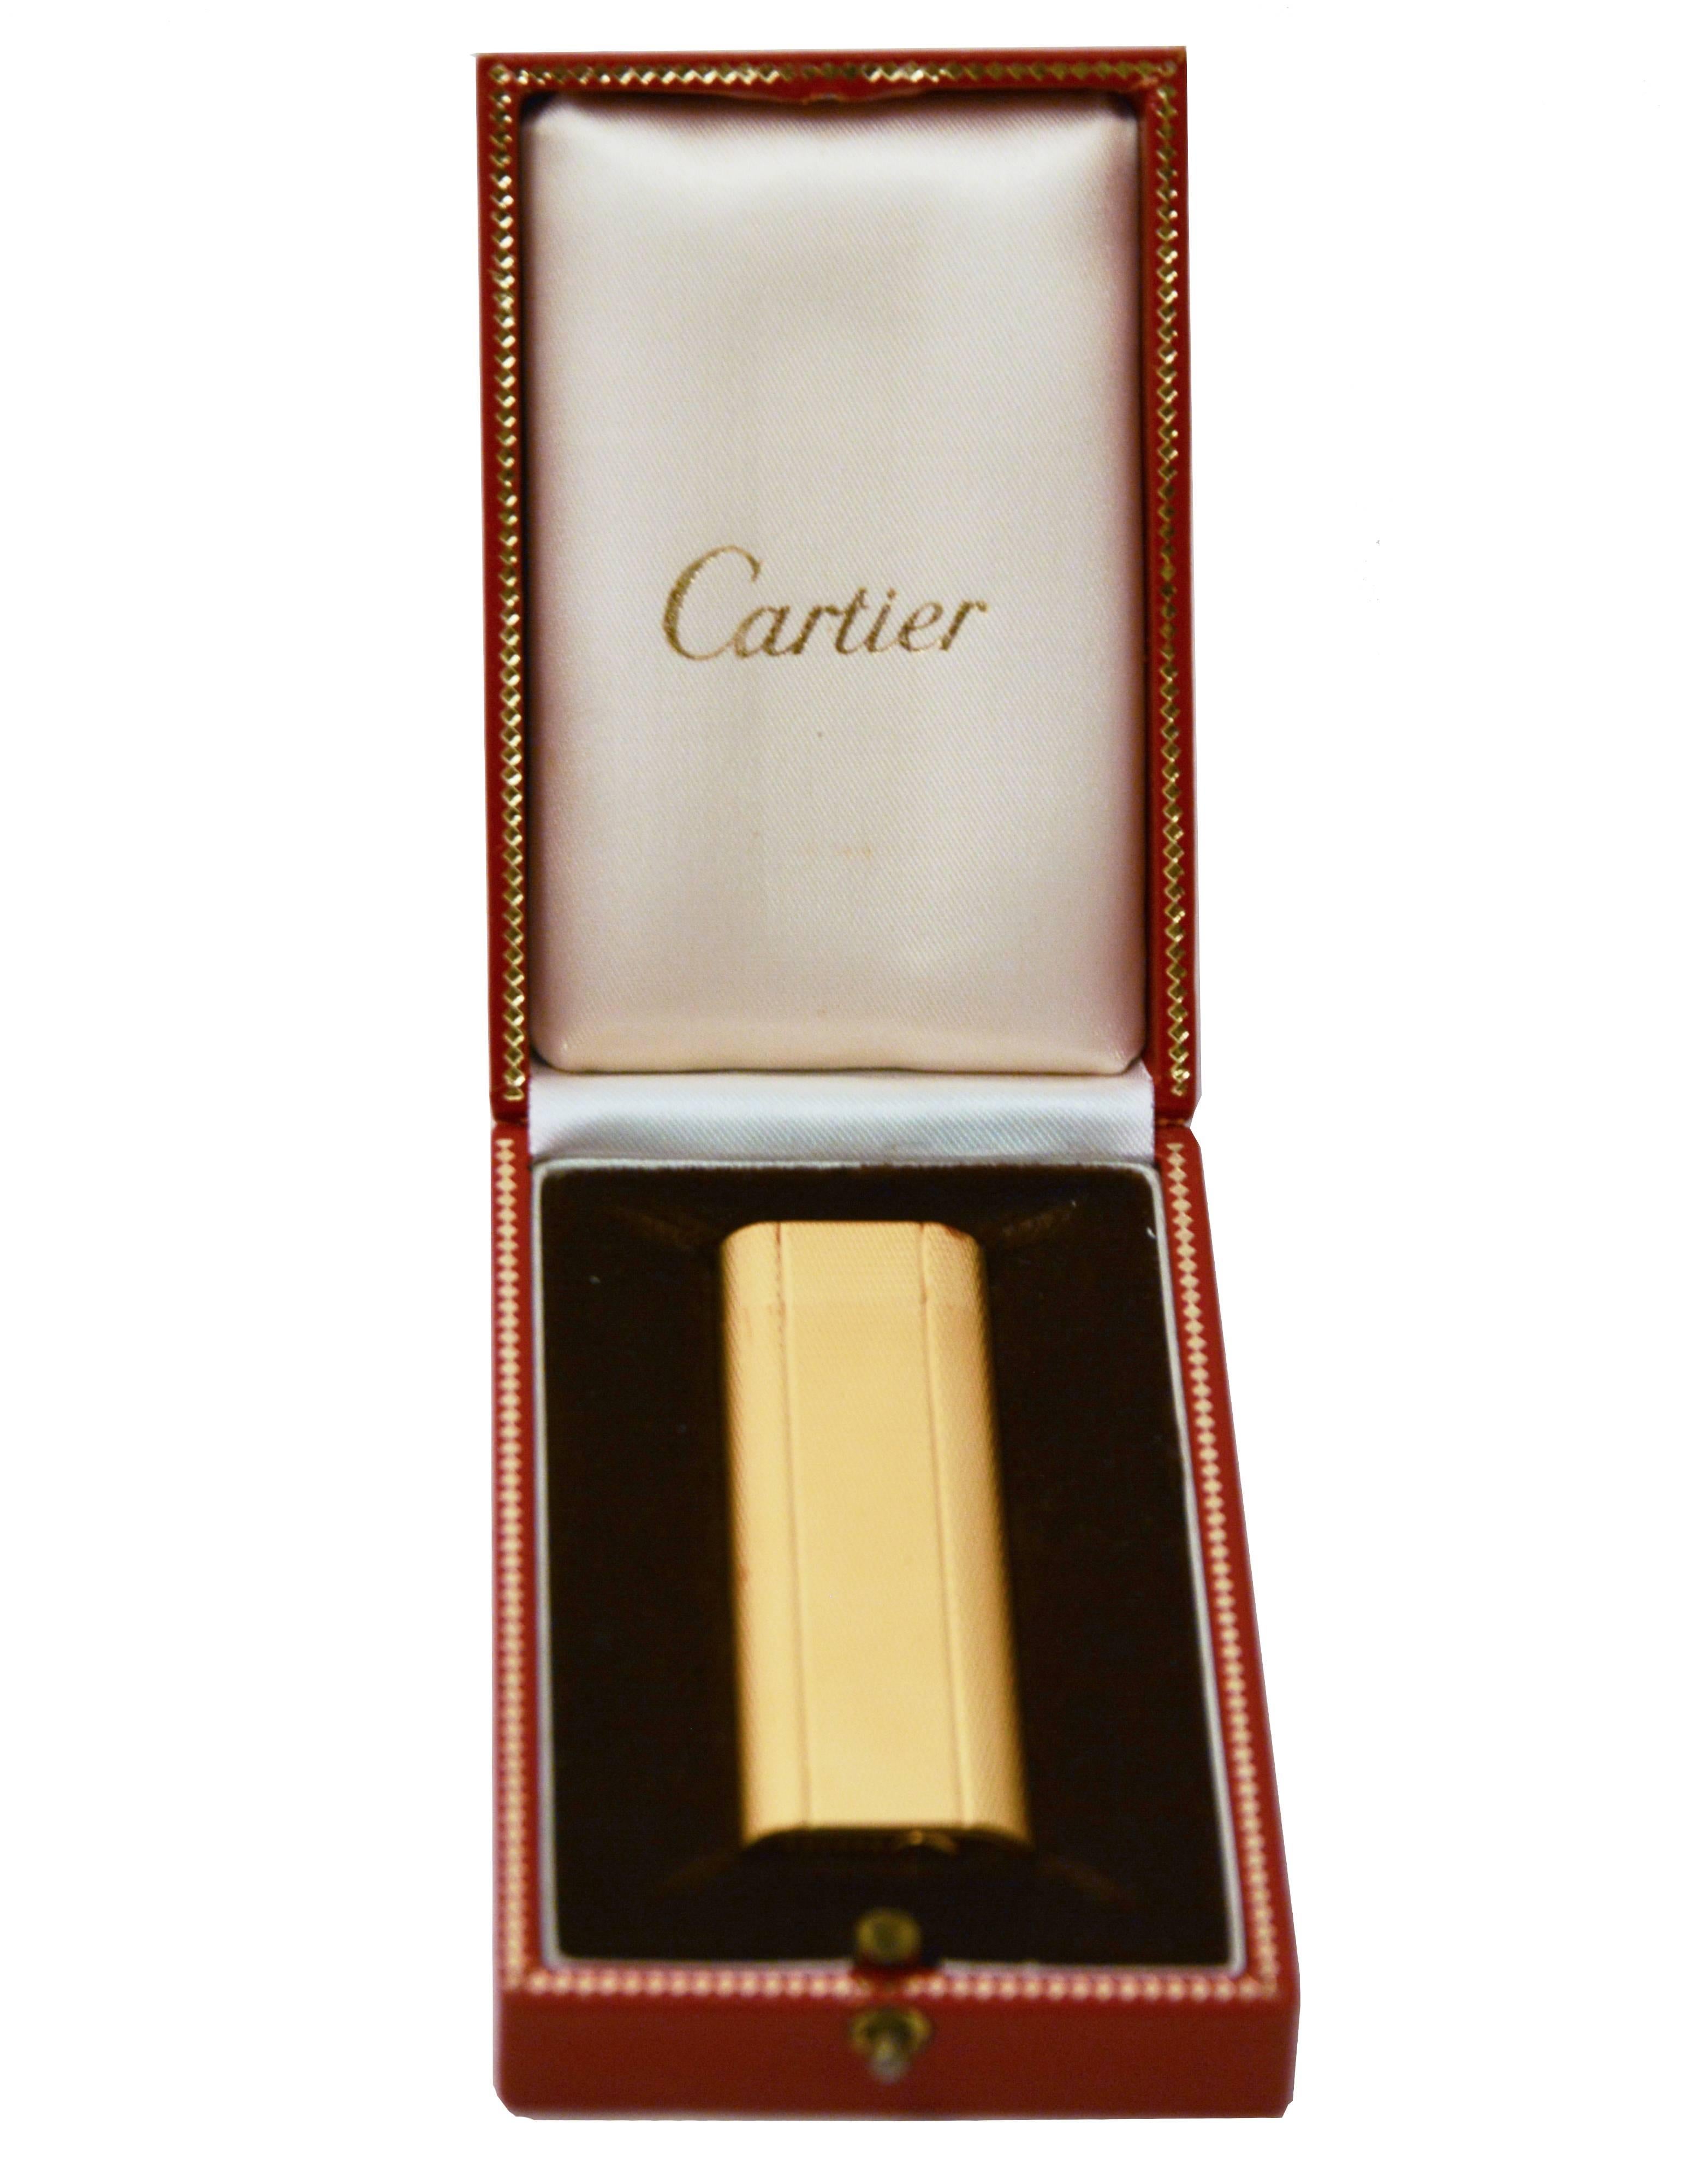 Cartier gold-plated lighter, 1990s. Excellent condition.
Made in France 
Measure: 2.5 L x 7 H x 1.5 W cm.
 